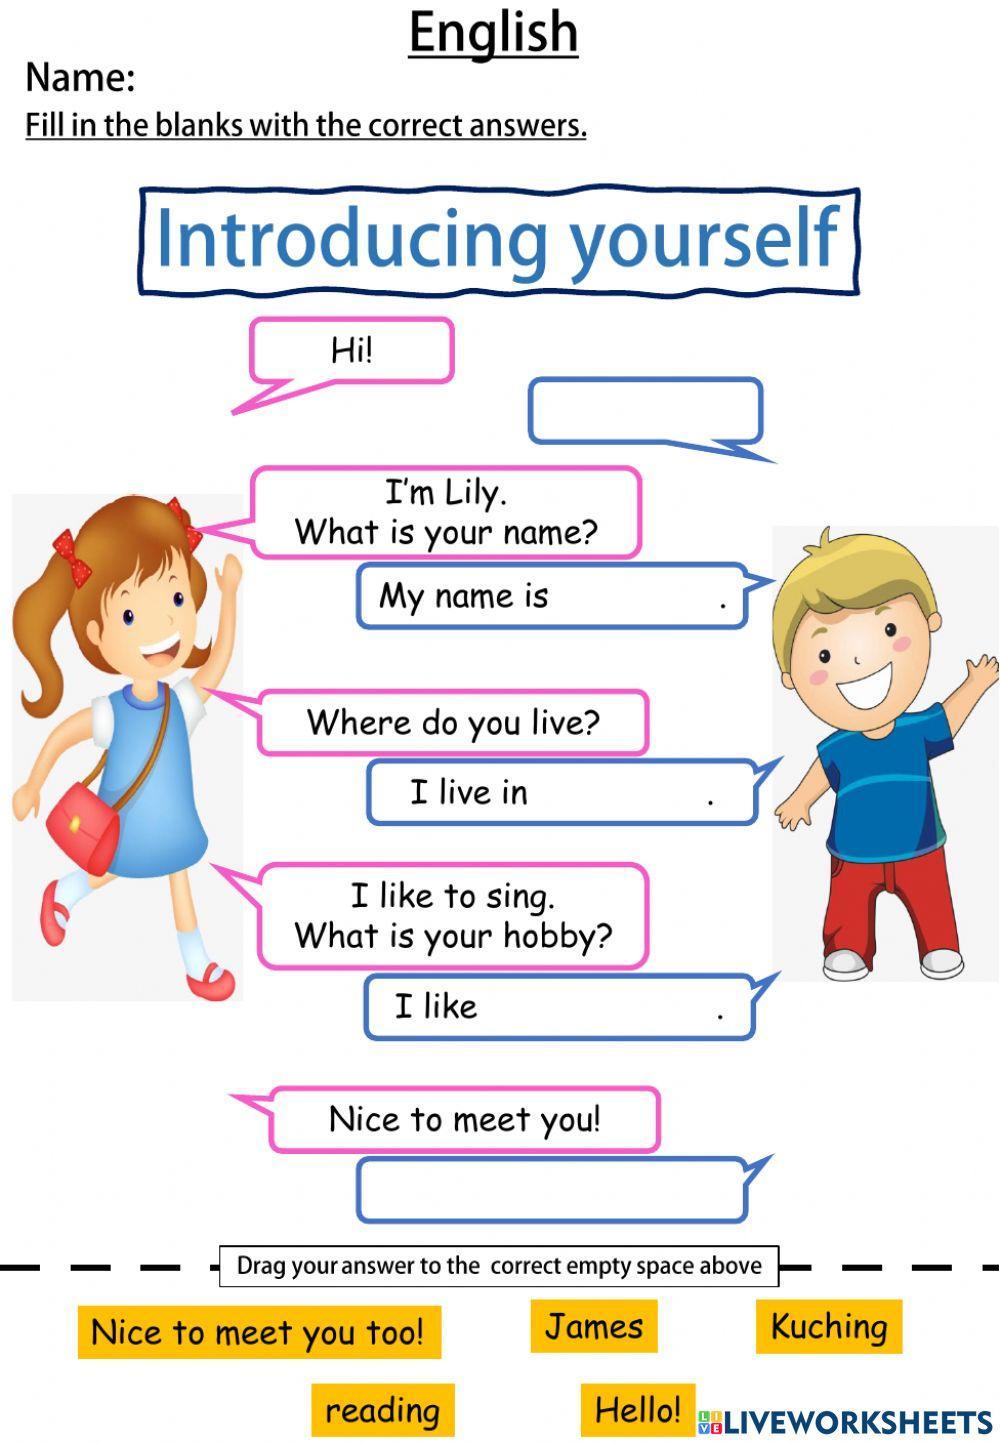 Introducing yourself